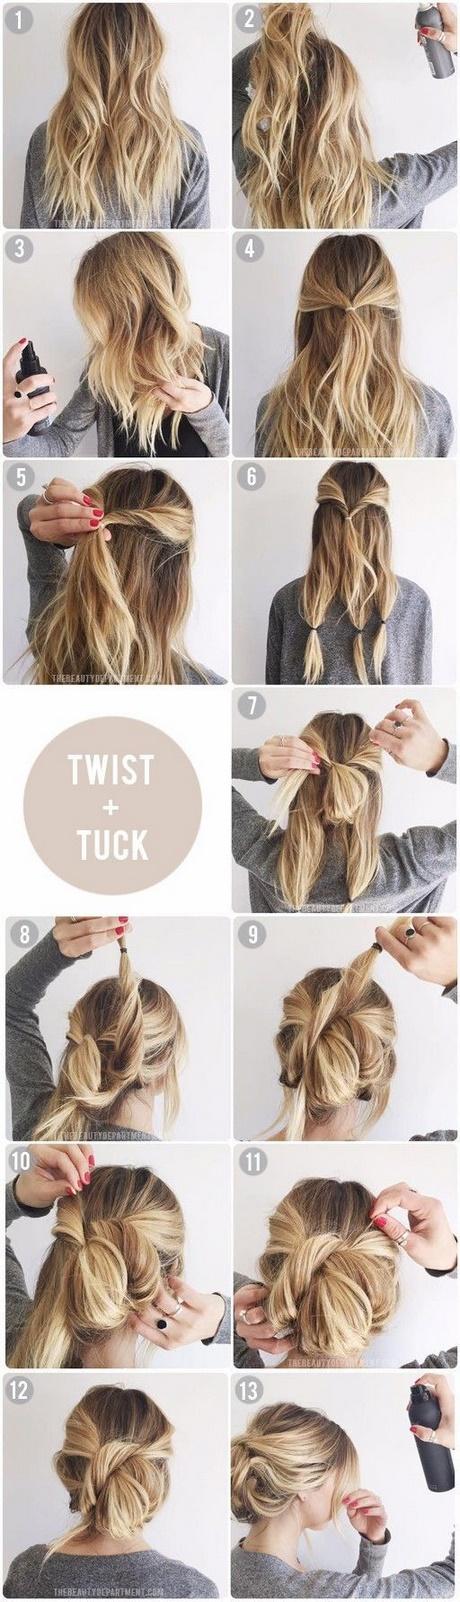 Easy updos for medium thick hair easy-updos-for-medium-thick-hair-34_7